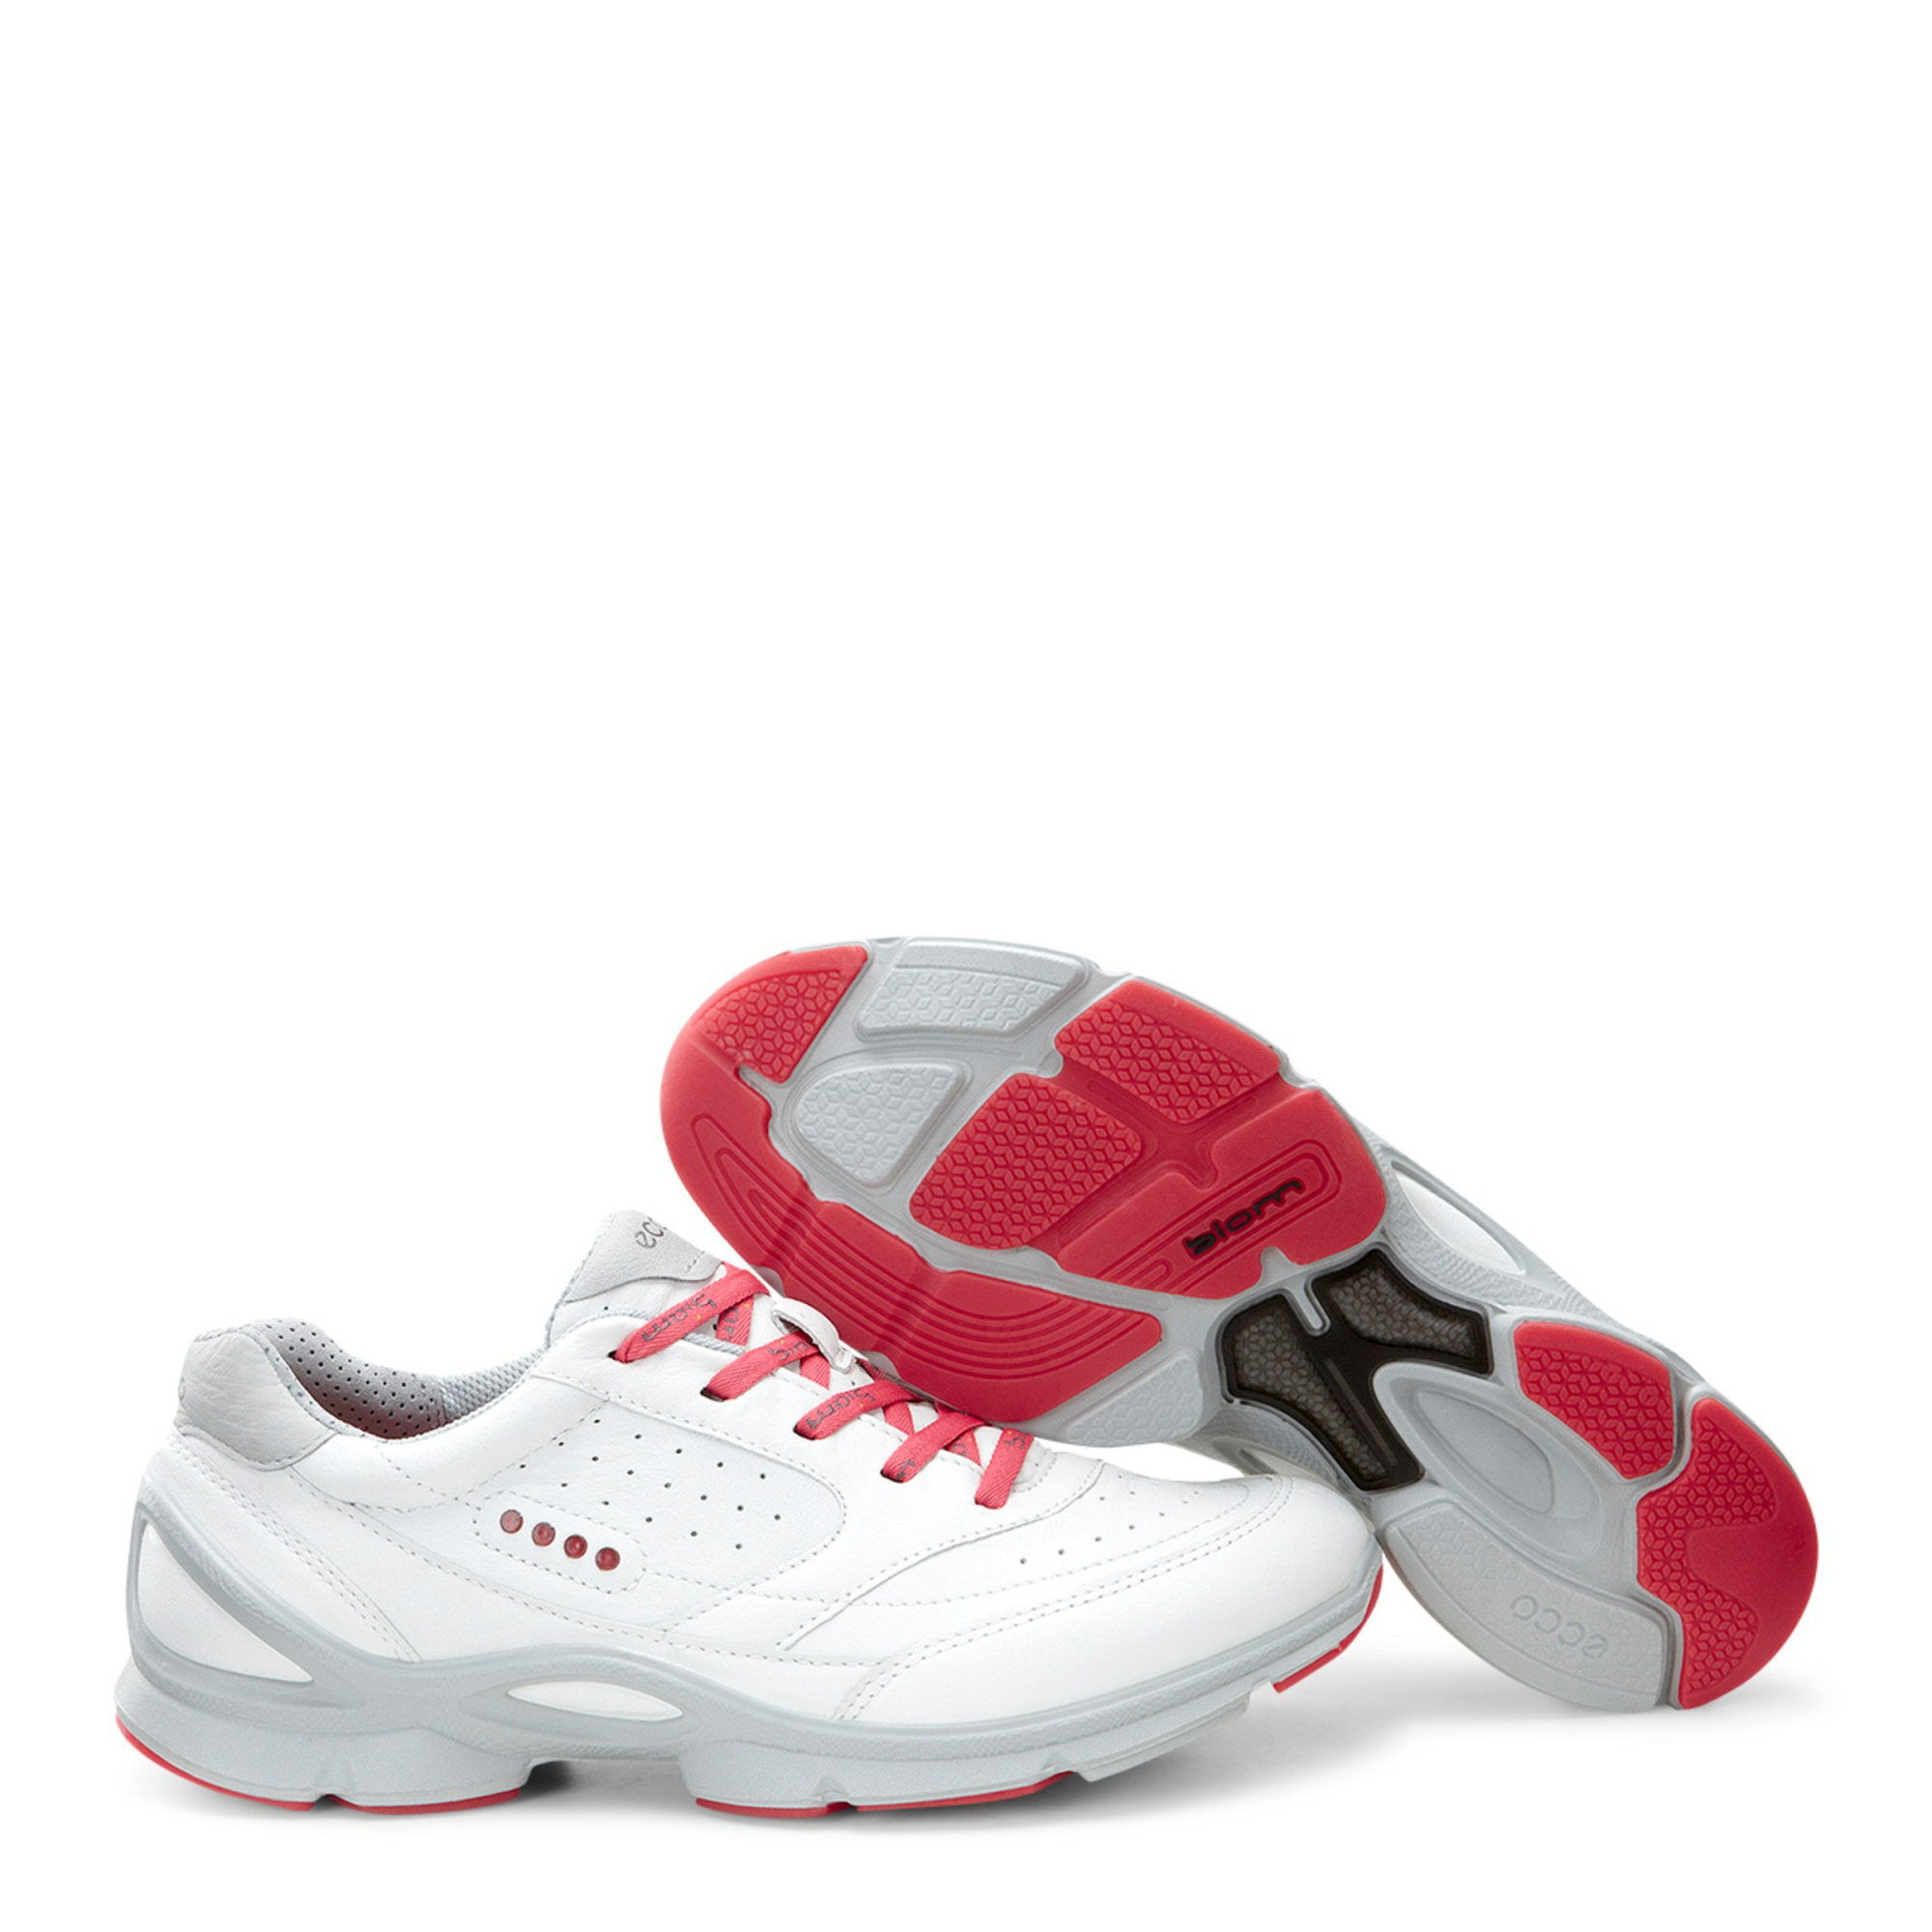 Politibetjent Partina City indendørs Ecco Wmns BIOM EVO Trainer II 38 - Products - Veryk Mall - Veryk Mall, many  product, quick response, safe your money!